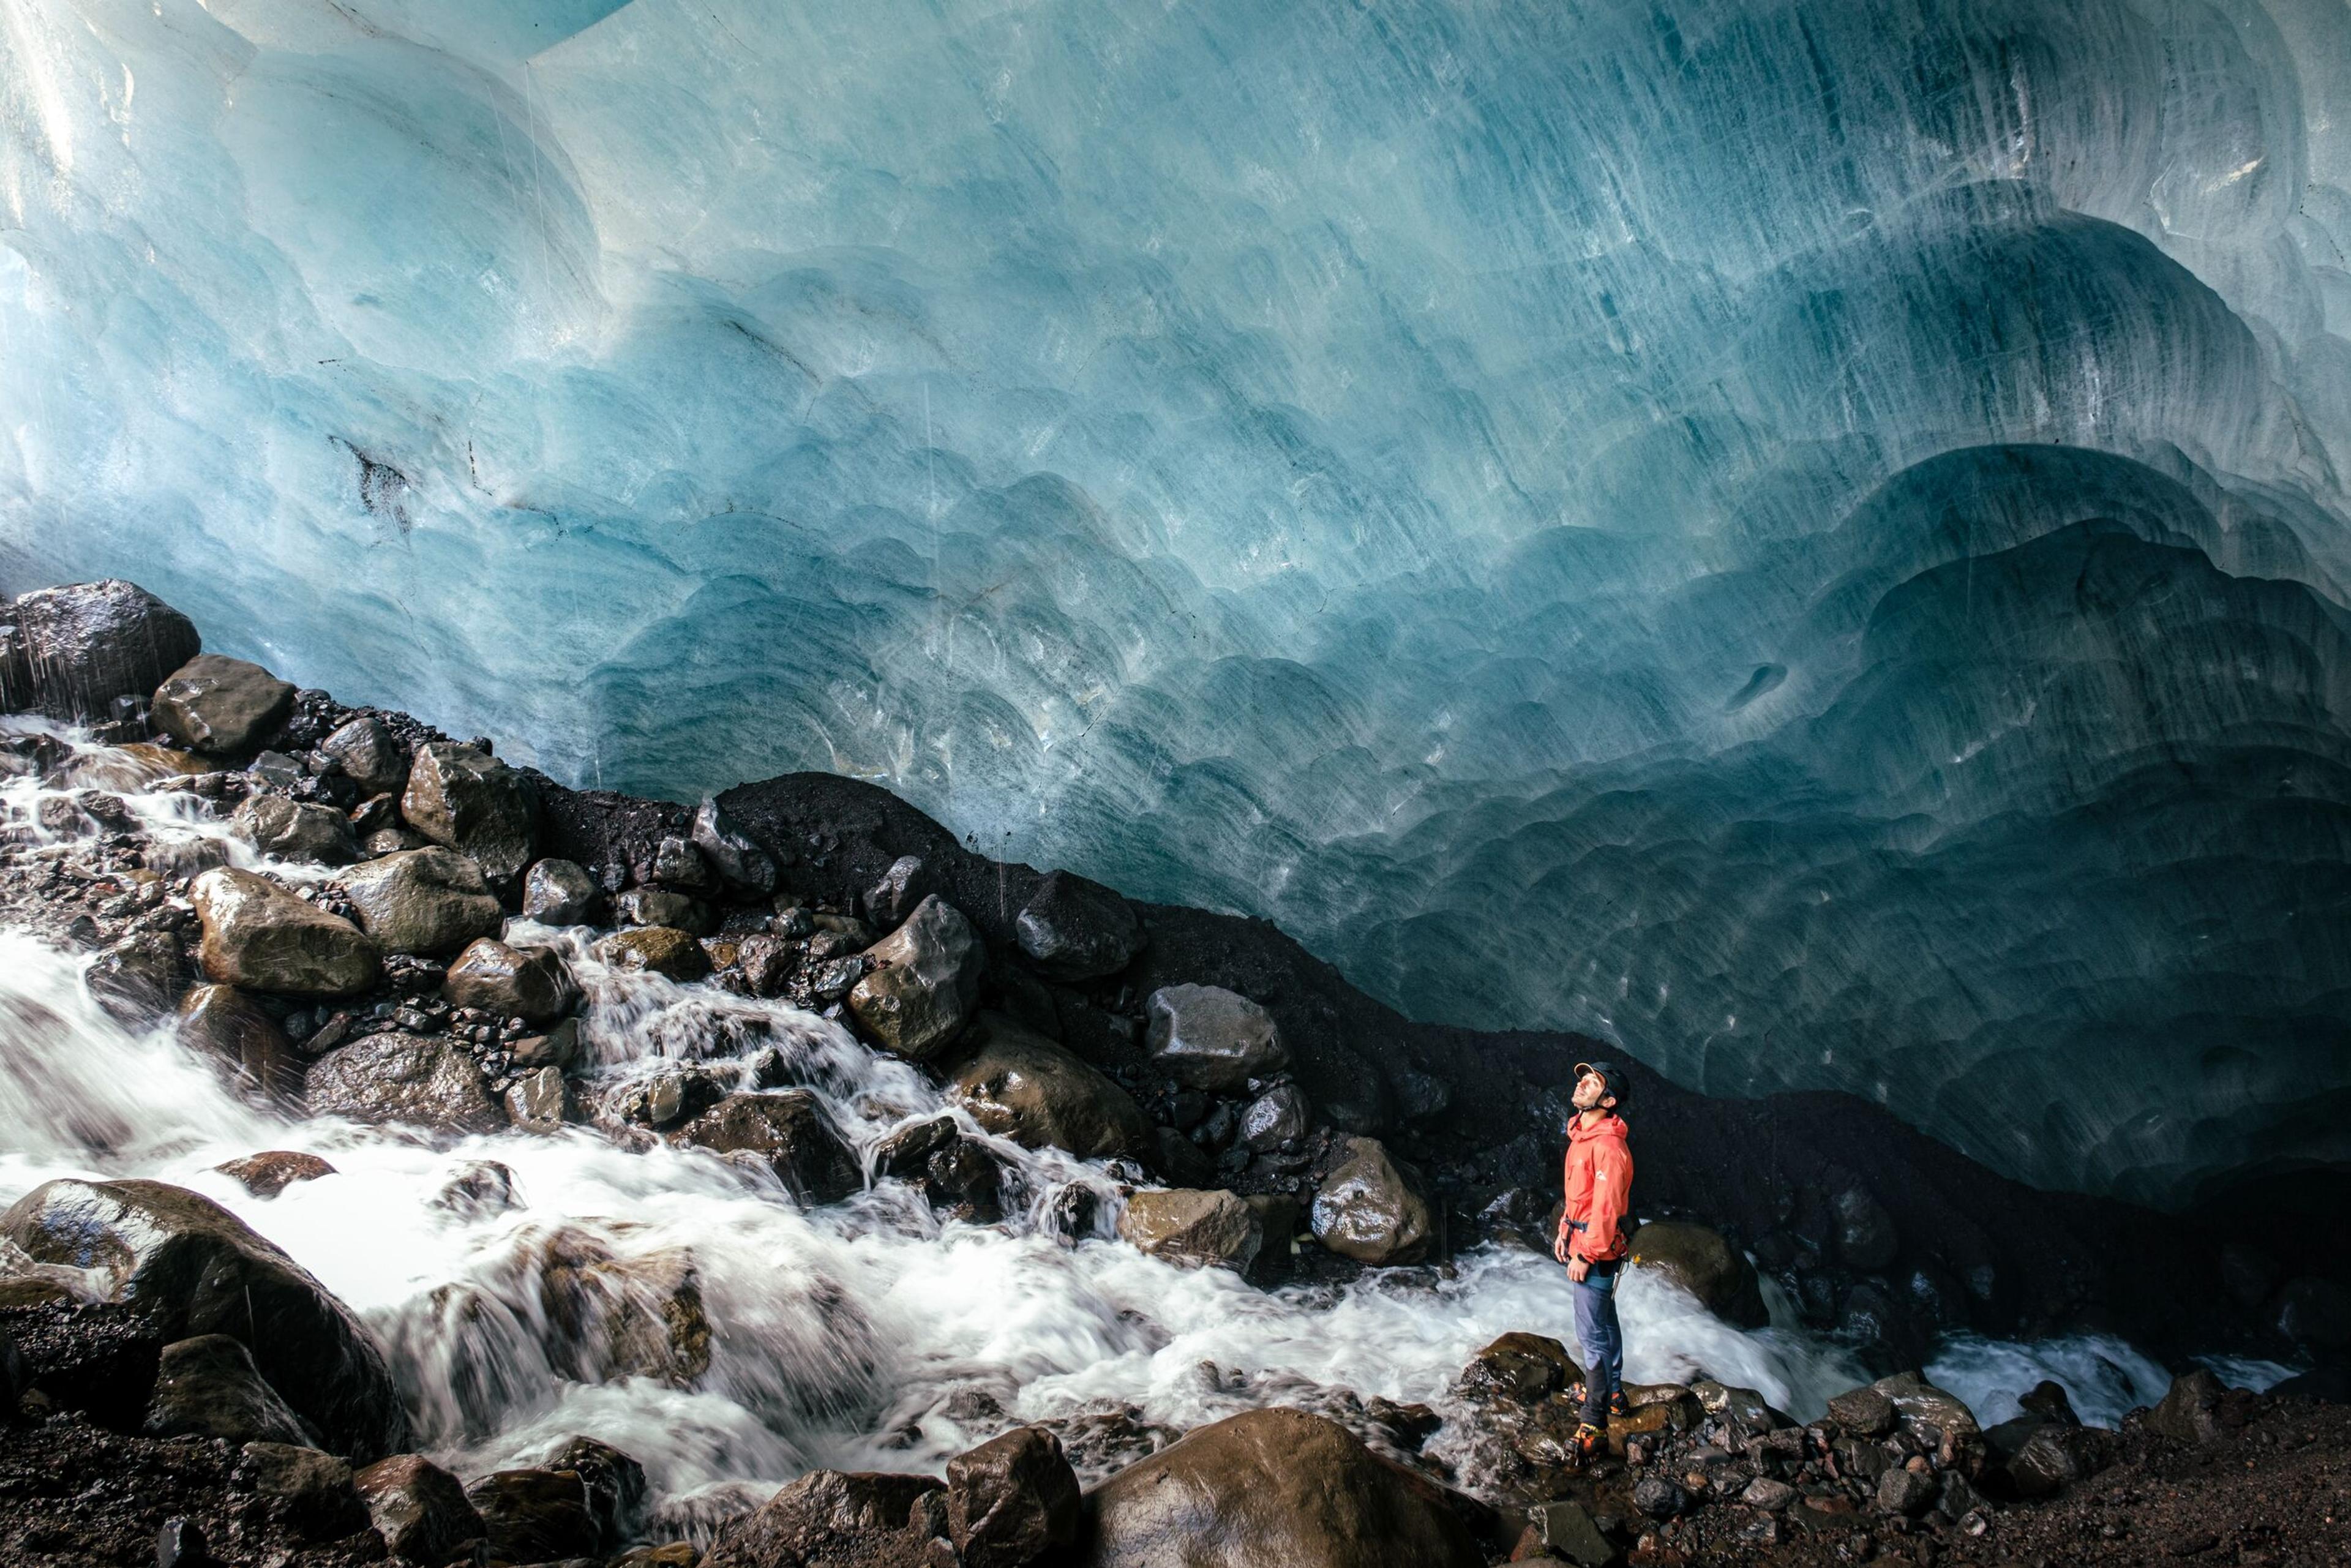 guide inside an ice cave in Skaftafell, Iceland